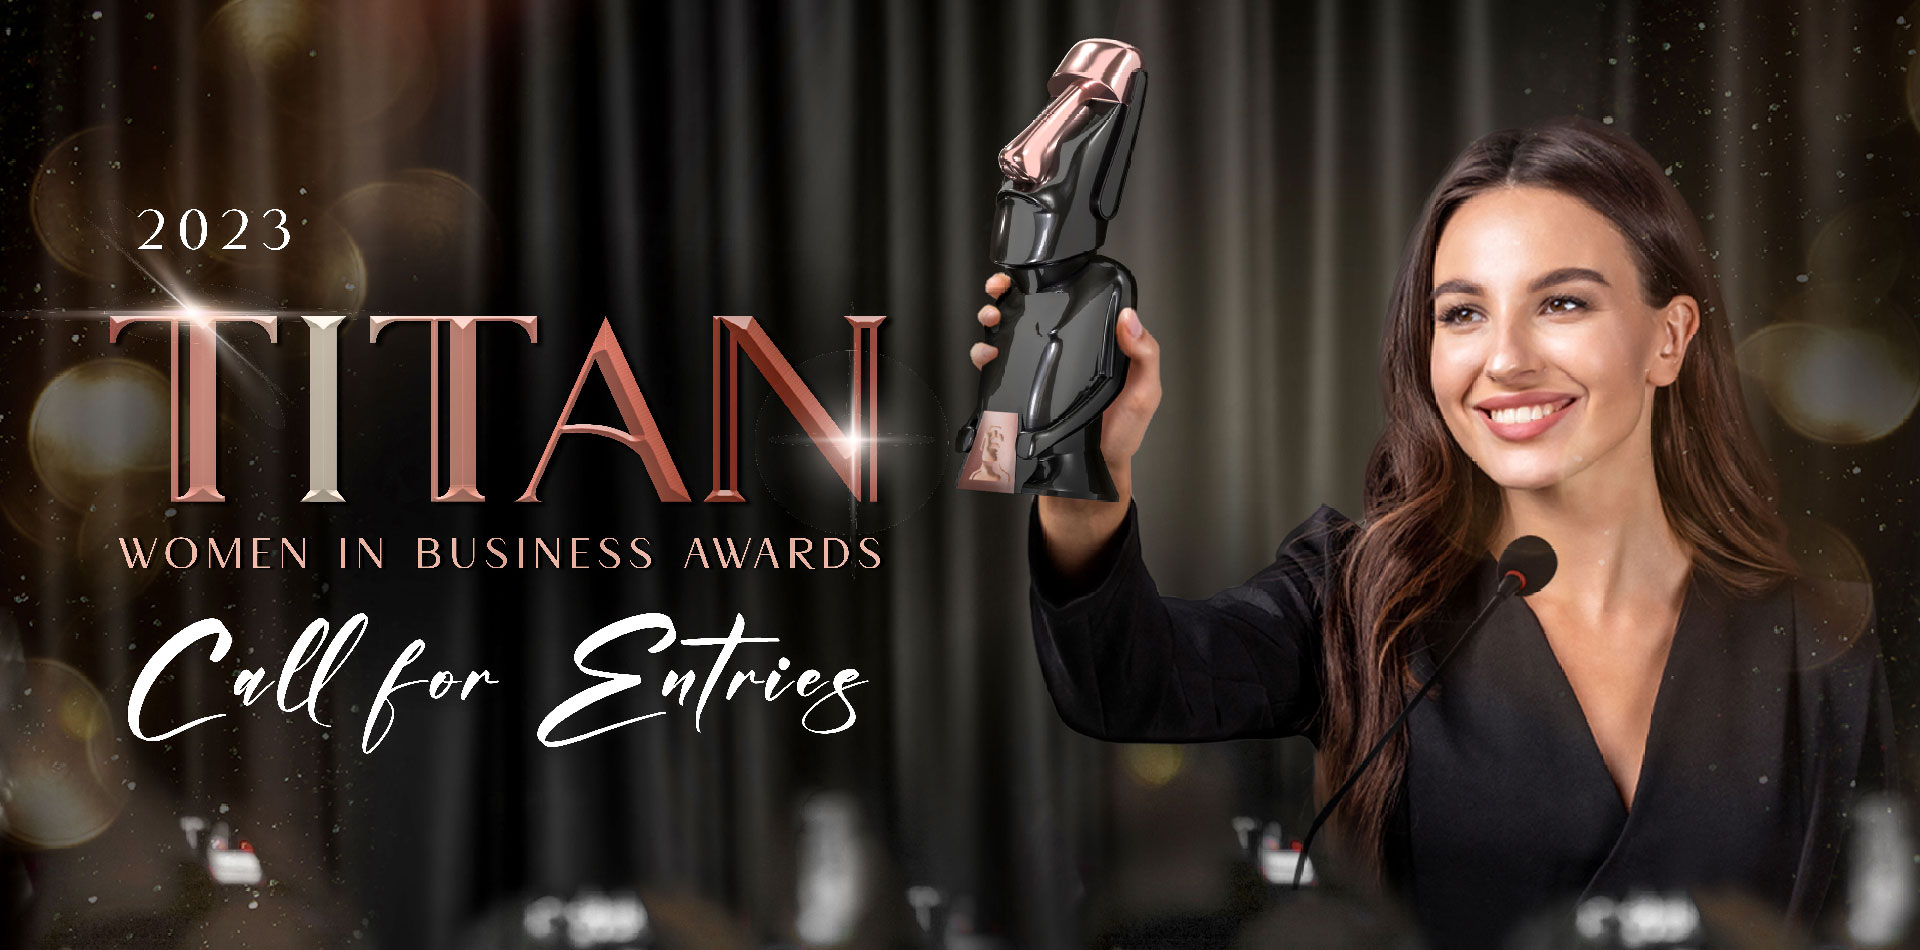 2022 TITAN Women In Business Awards Announces Full Results